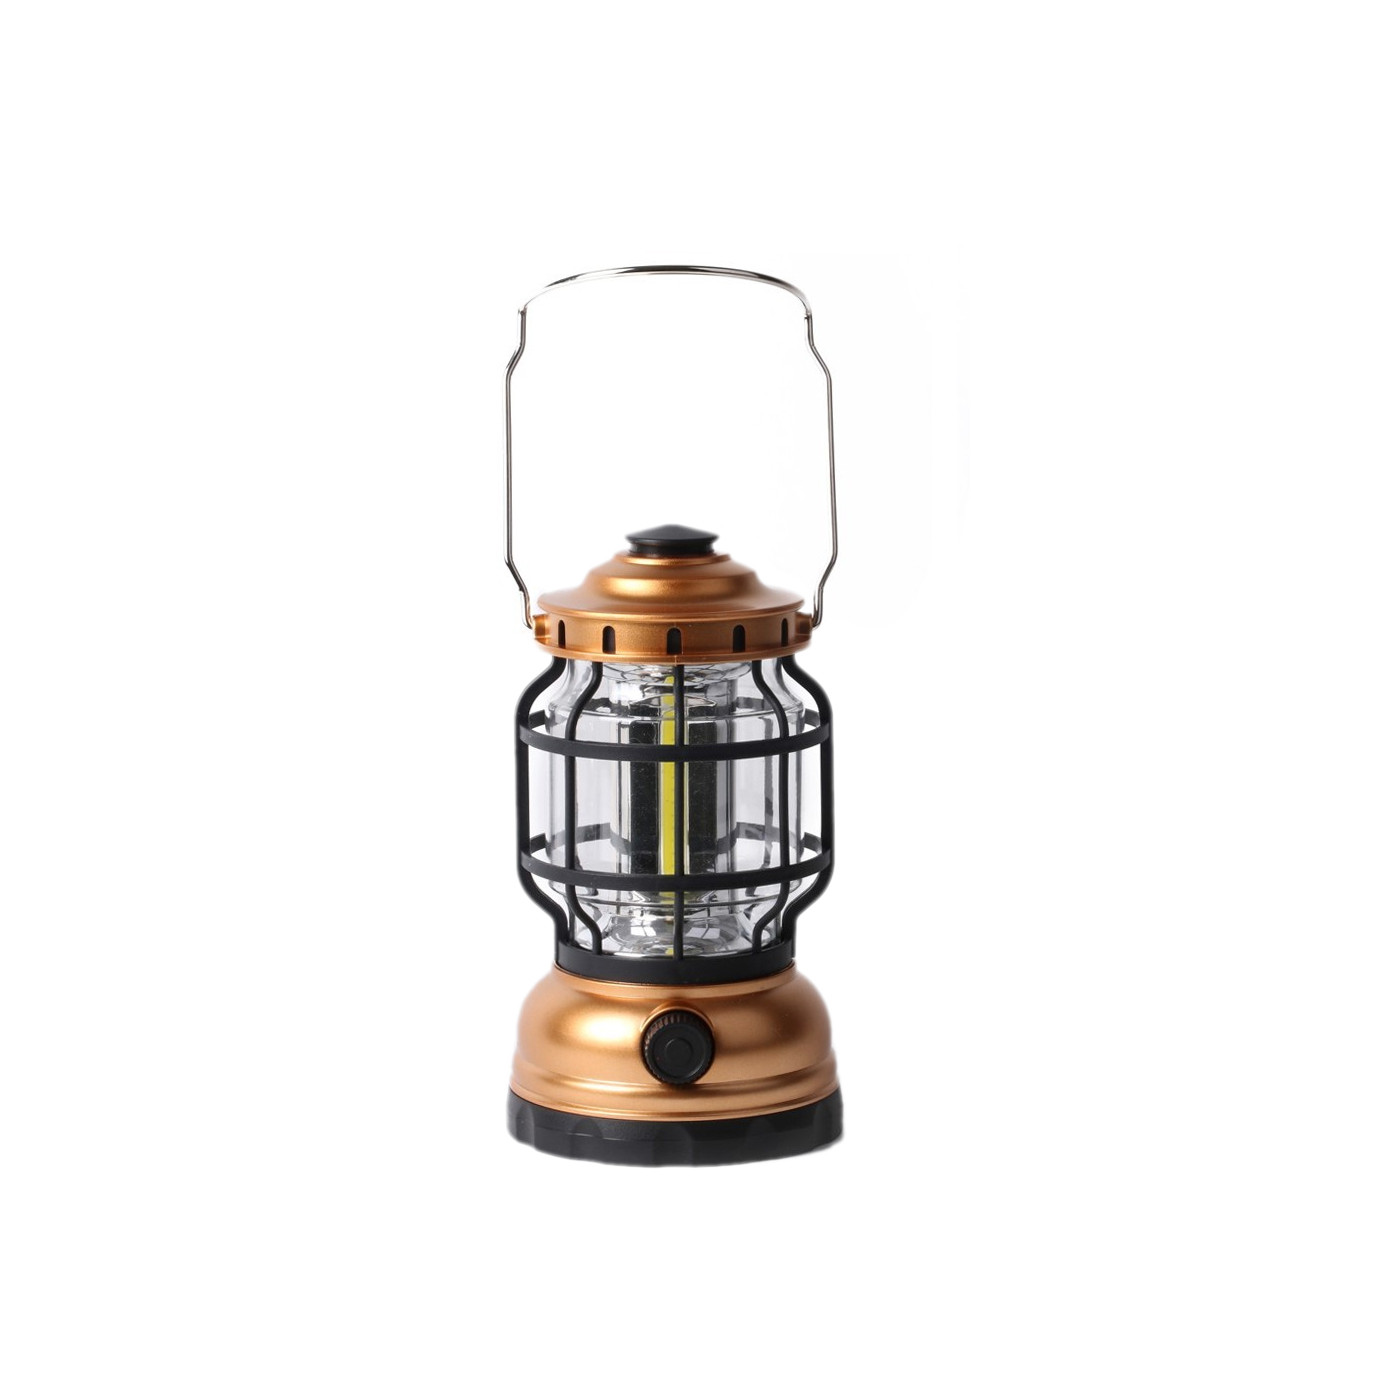 https://www.woodtoolsanddeco.com/11466-large_default/retro-camping-lamp-dimmable-battery-operated-gold.jpg